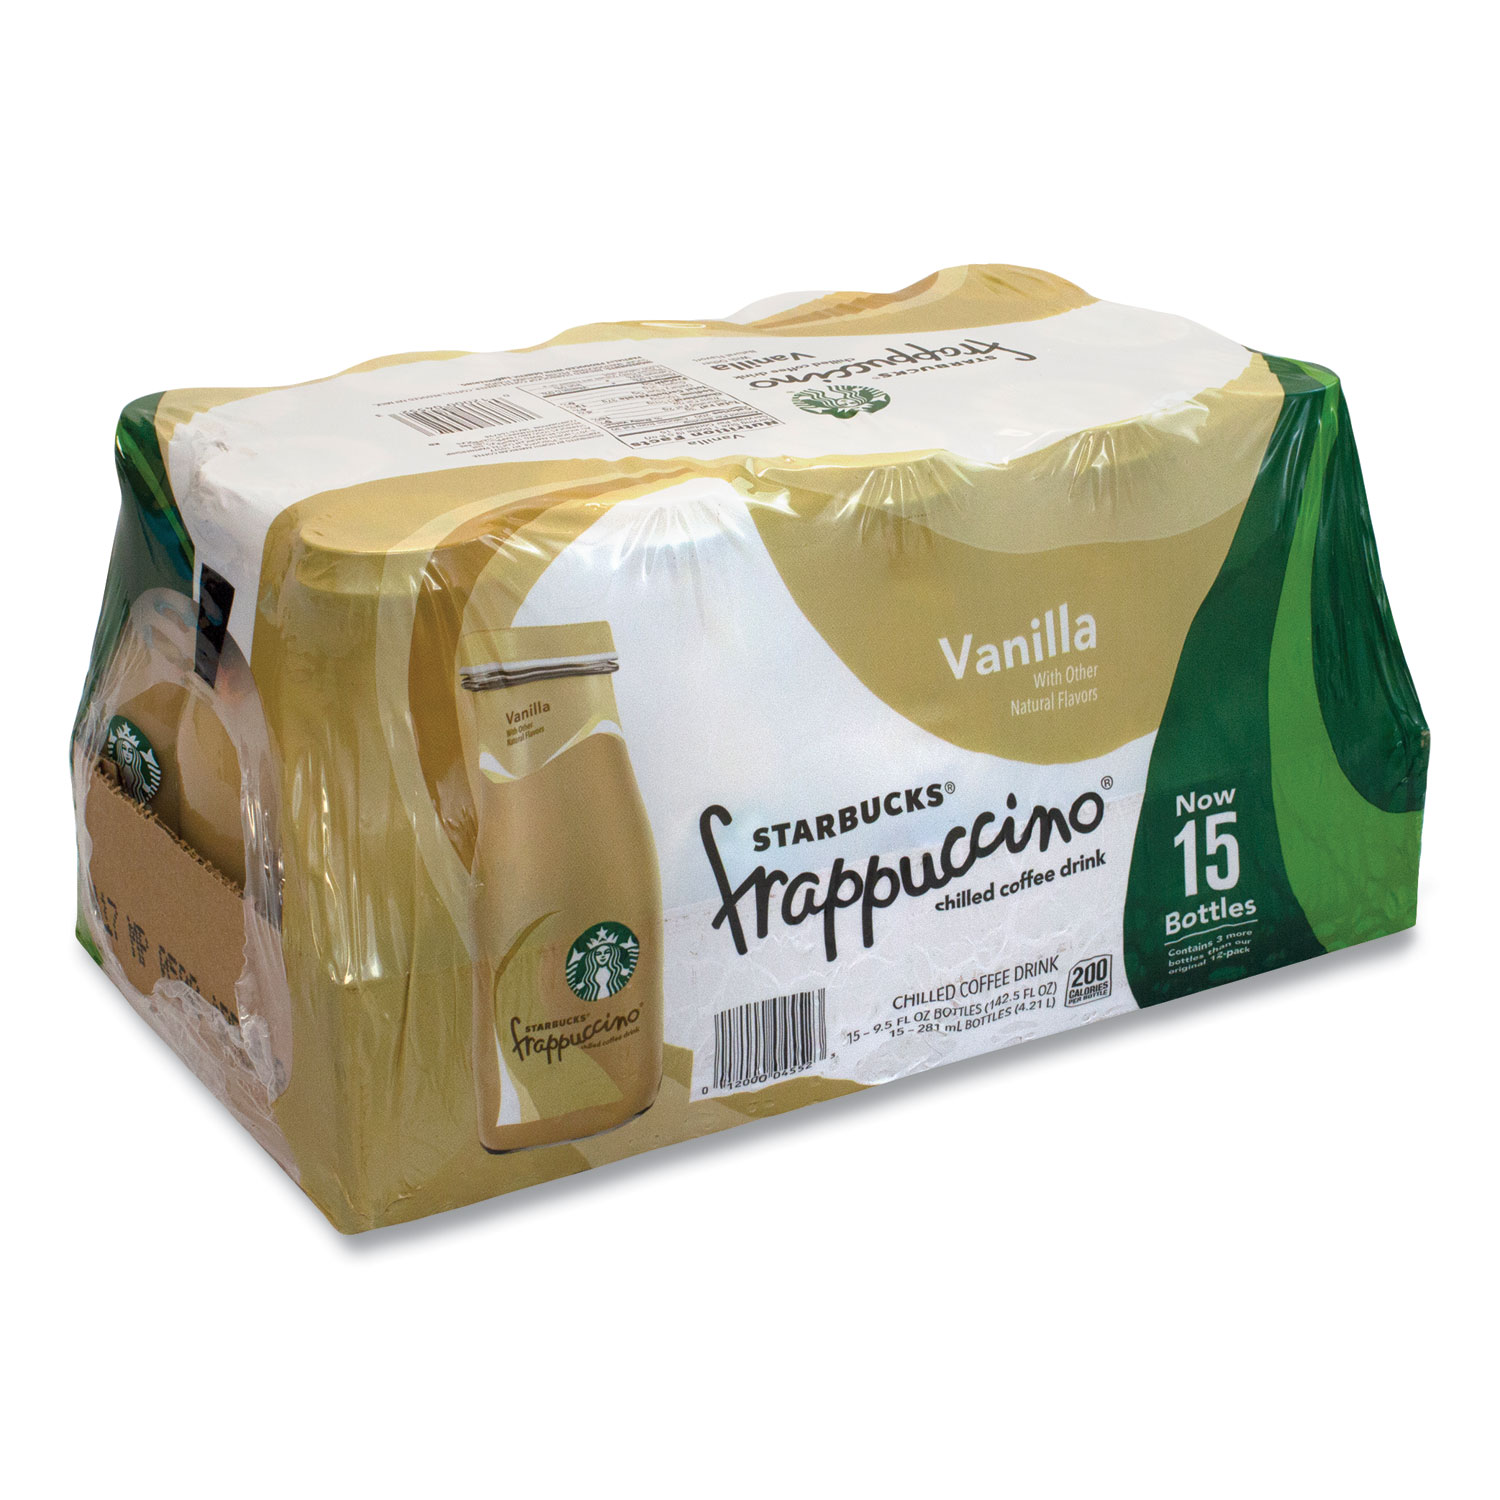  Starbucks 285256 Frappuccino Coffee, 9.5 oz Bottle, Vanilla, 15/Pack, Free Delivery in 1-4 Business Days (GRR90000050) 